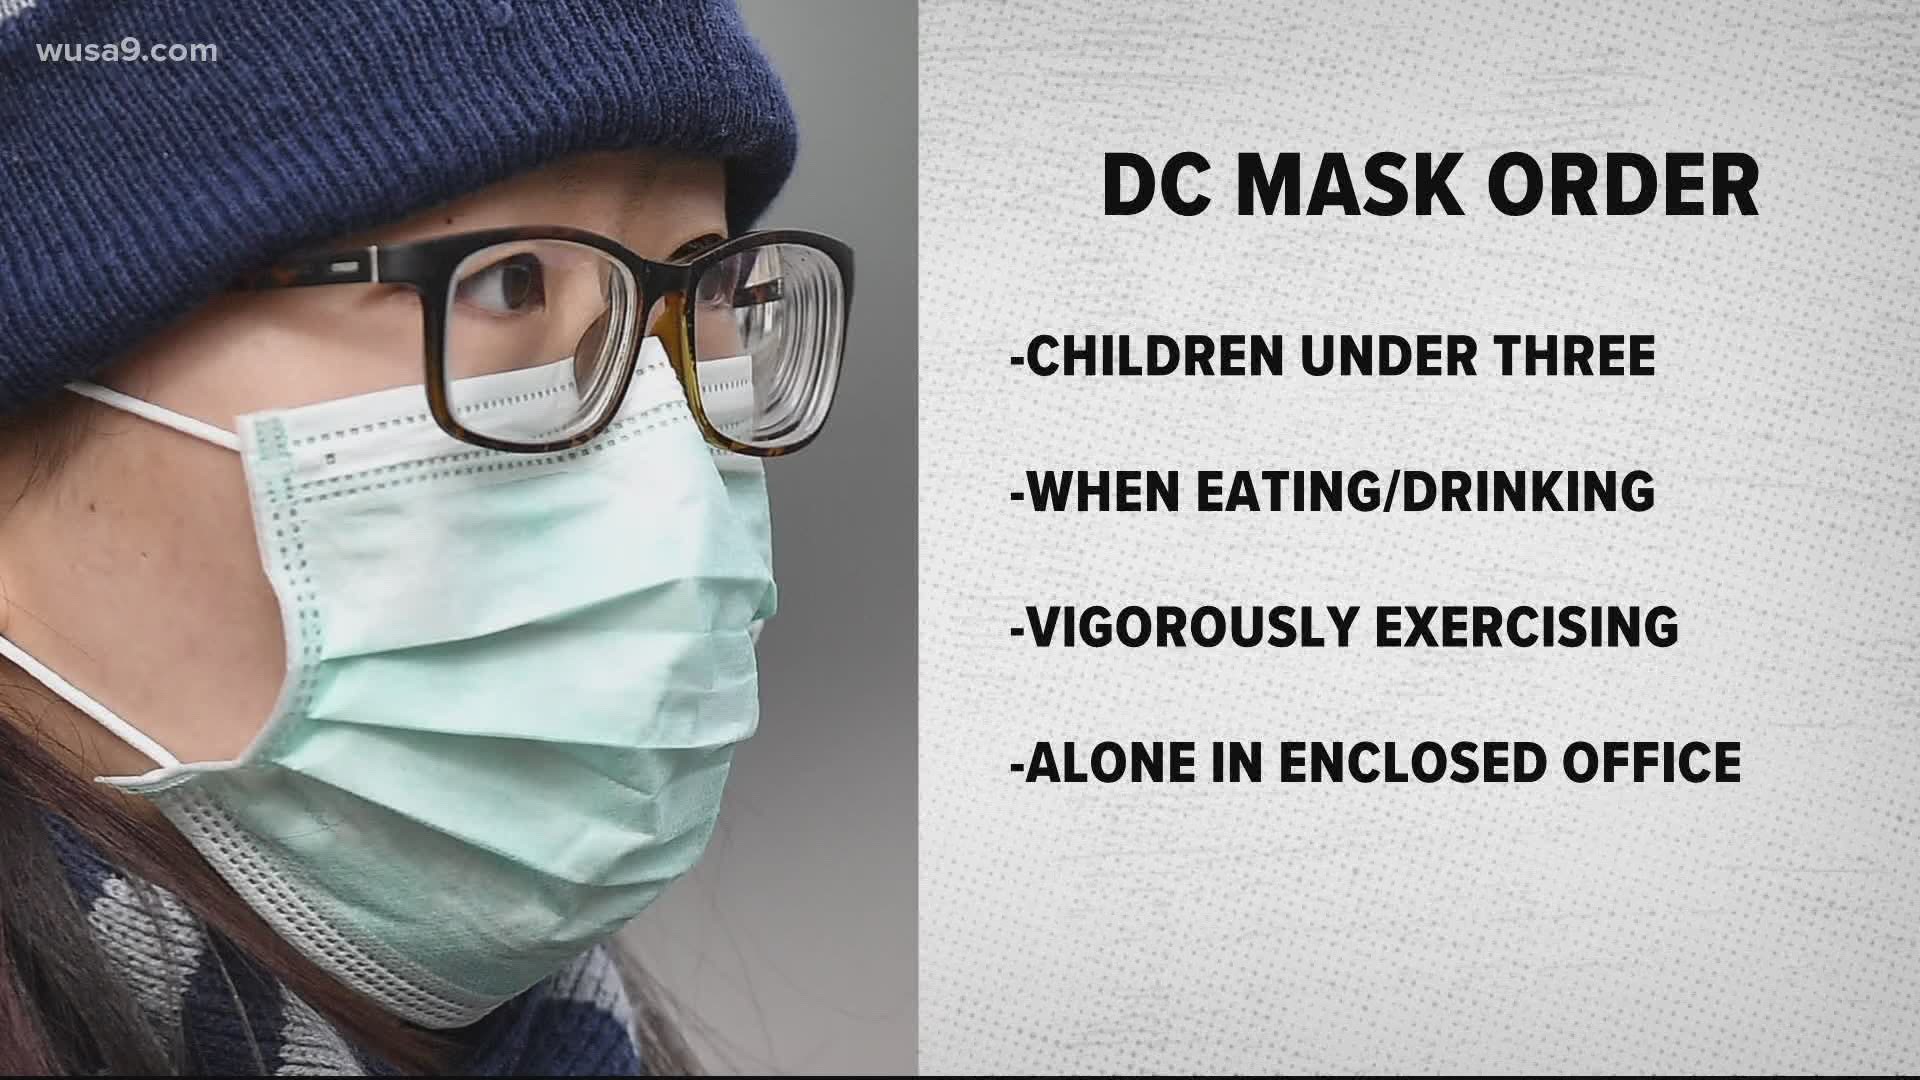 DC Mayor Muriel Bowser signed an order requiring residents to wear a mask in public.